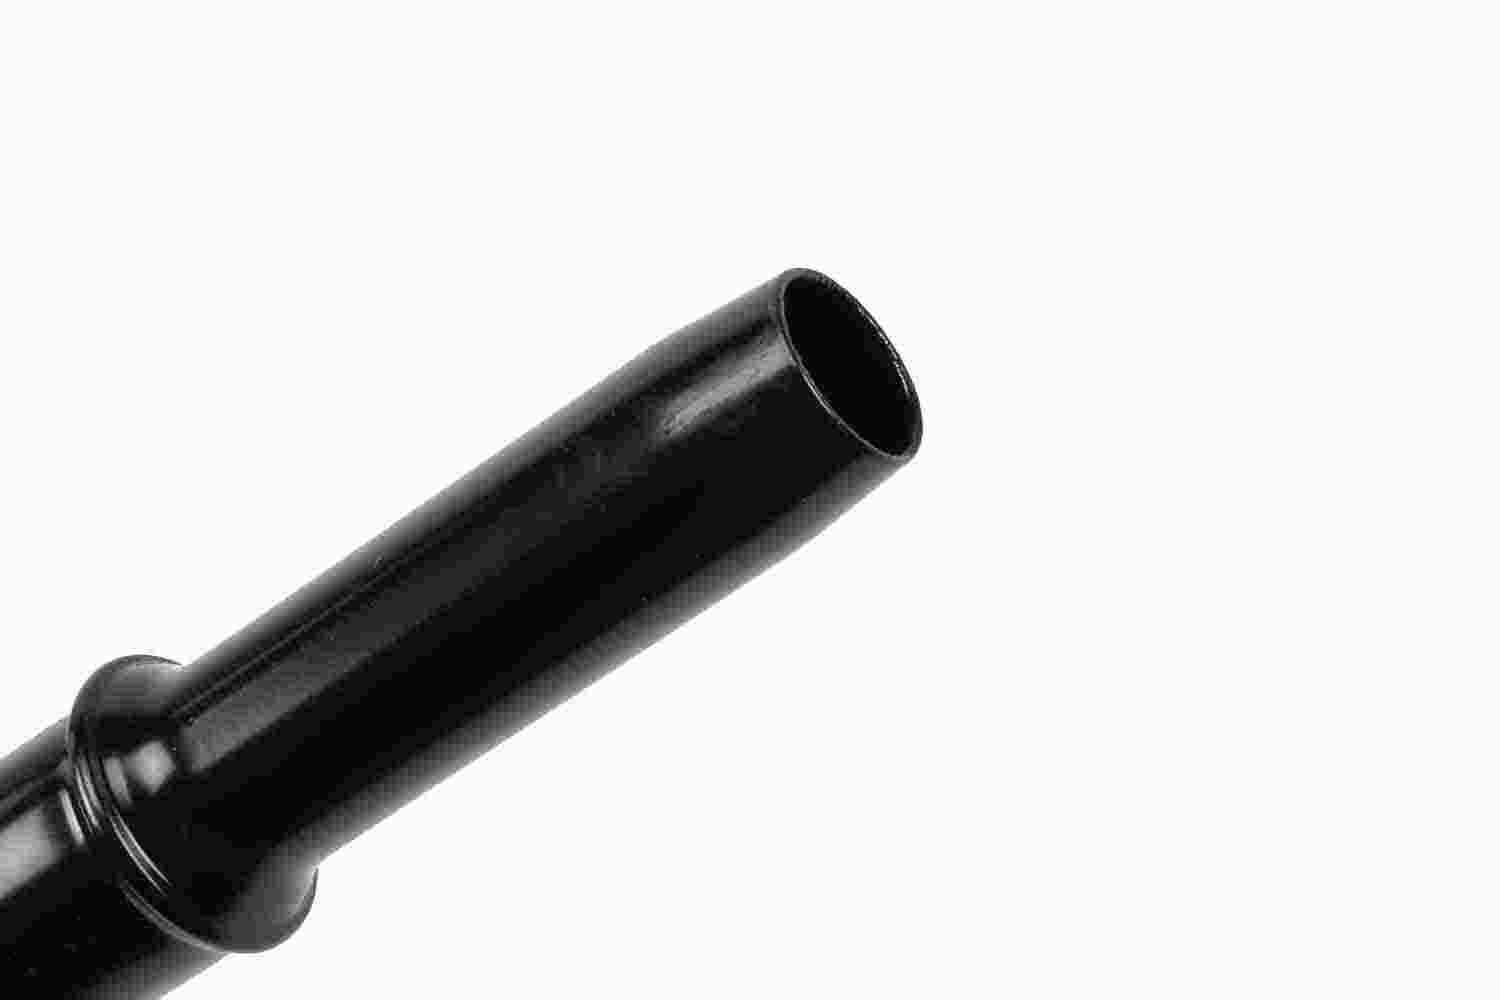 GM GENUINE PARTS - Automatic Transmission Fluid Filler Tube - GMP 15281541